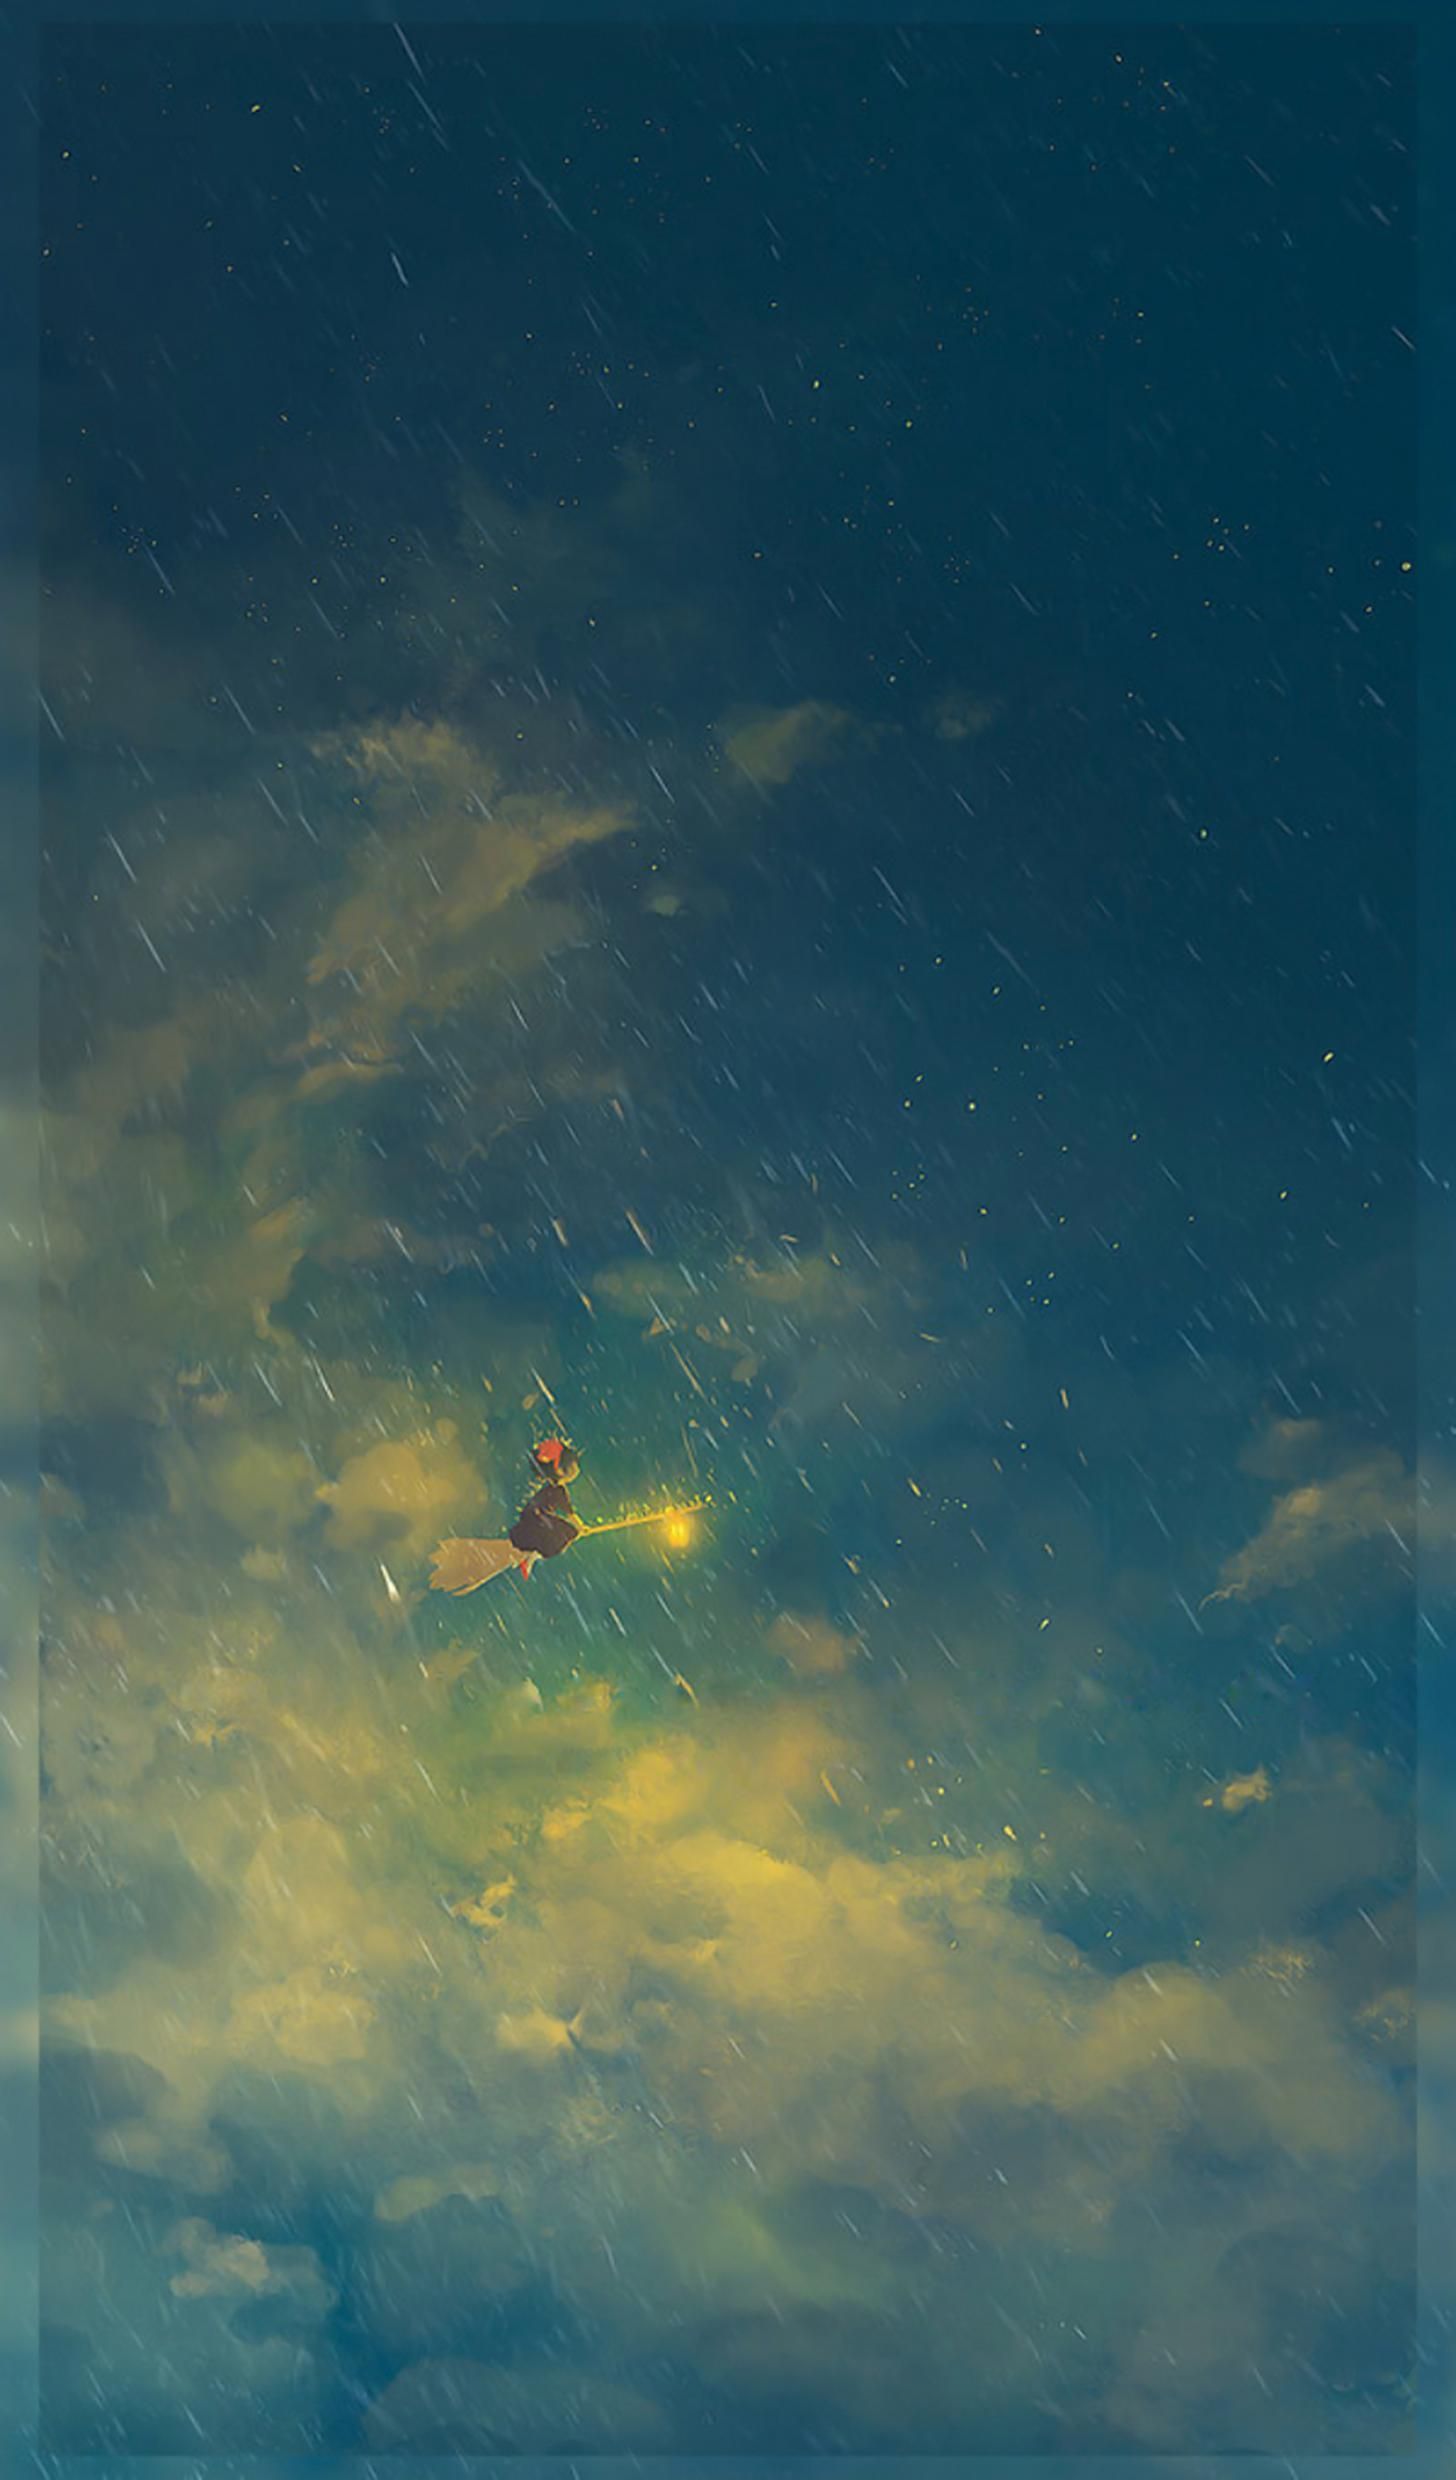 Studio Ghibli mobile wallpaper without text post. Studio ghibli movies, Studio ghibli, Ghibli artwork